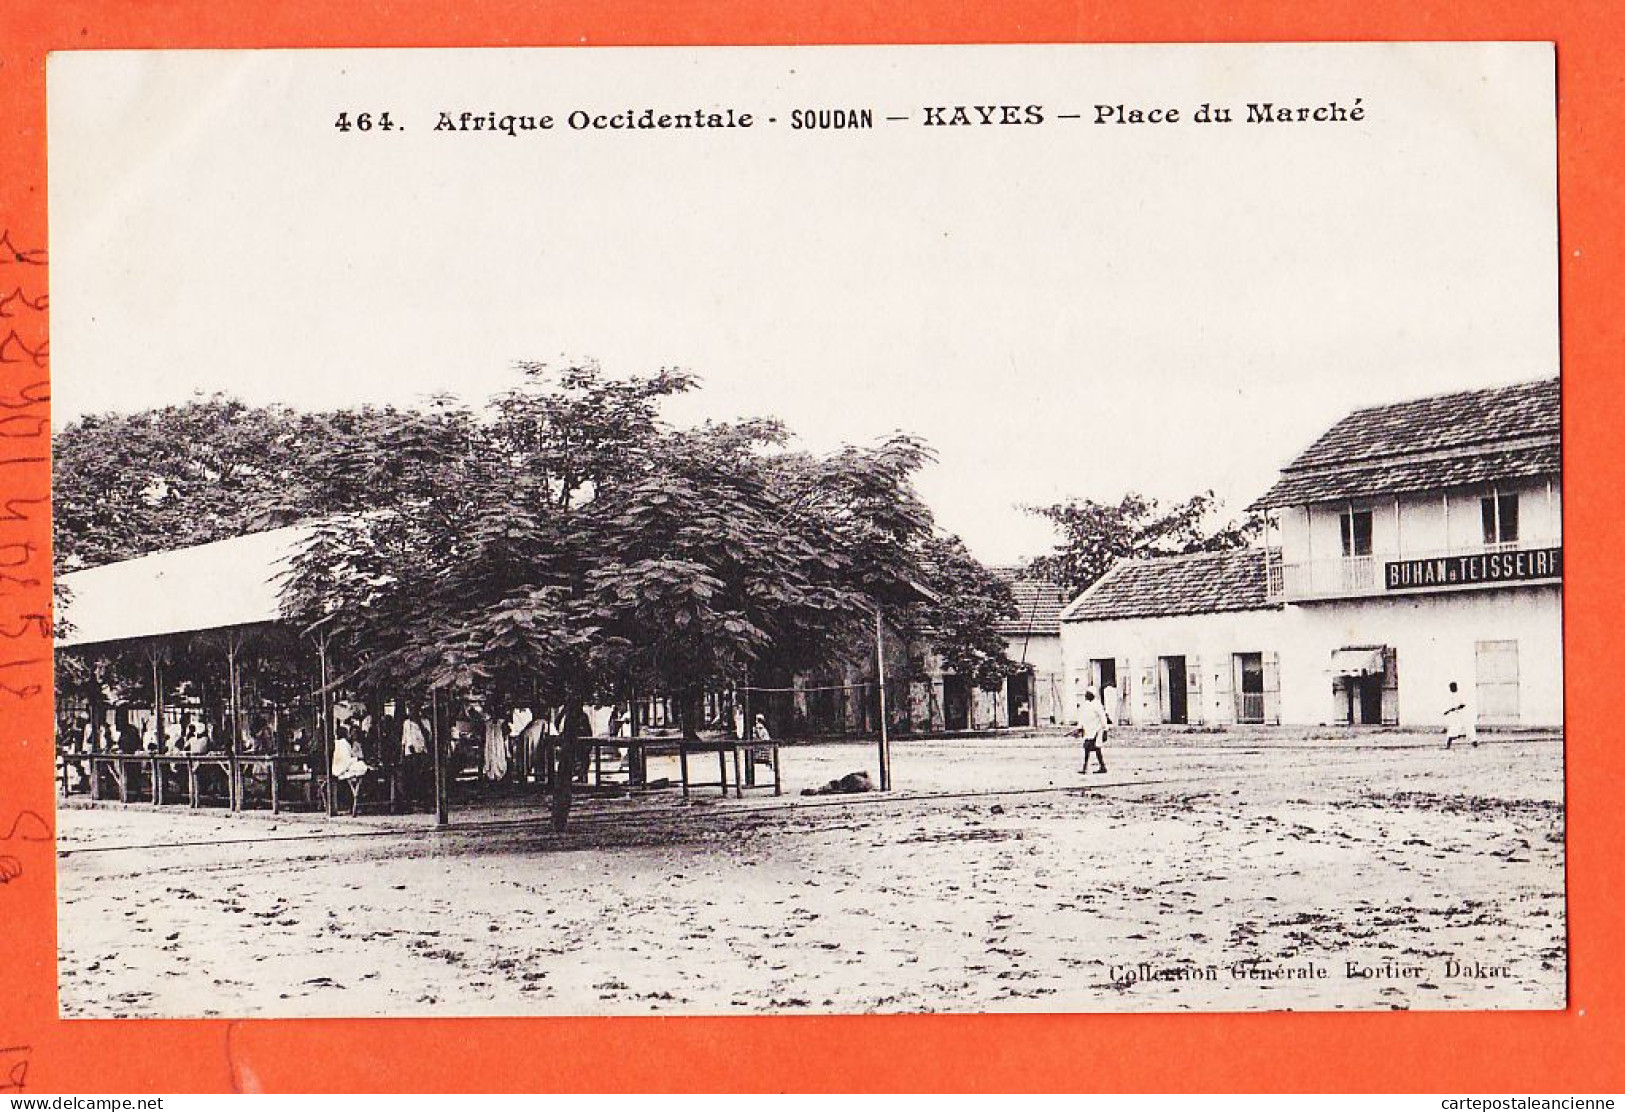 32974 / ♥️ KAYES Soudan (•◡•) BUHAN-TEISSEIRE Place Marché ◉ Collection Generale FORTIER Dakar 464 Afrique Occidentale - Soedan